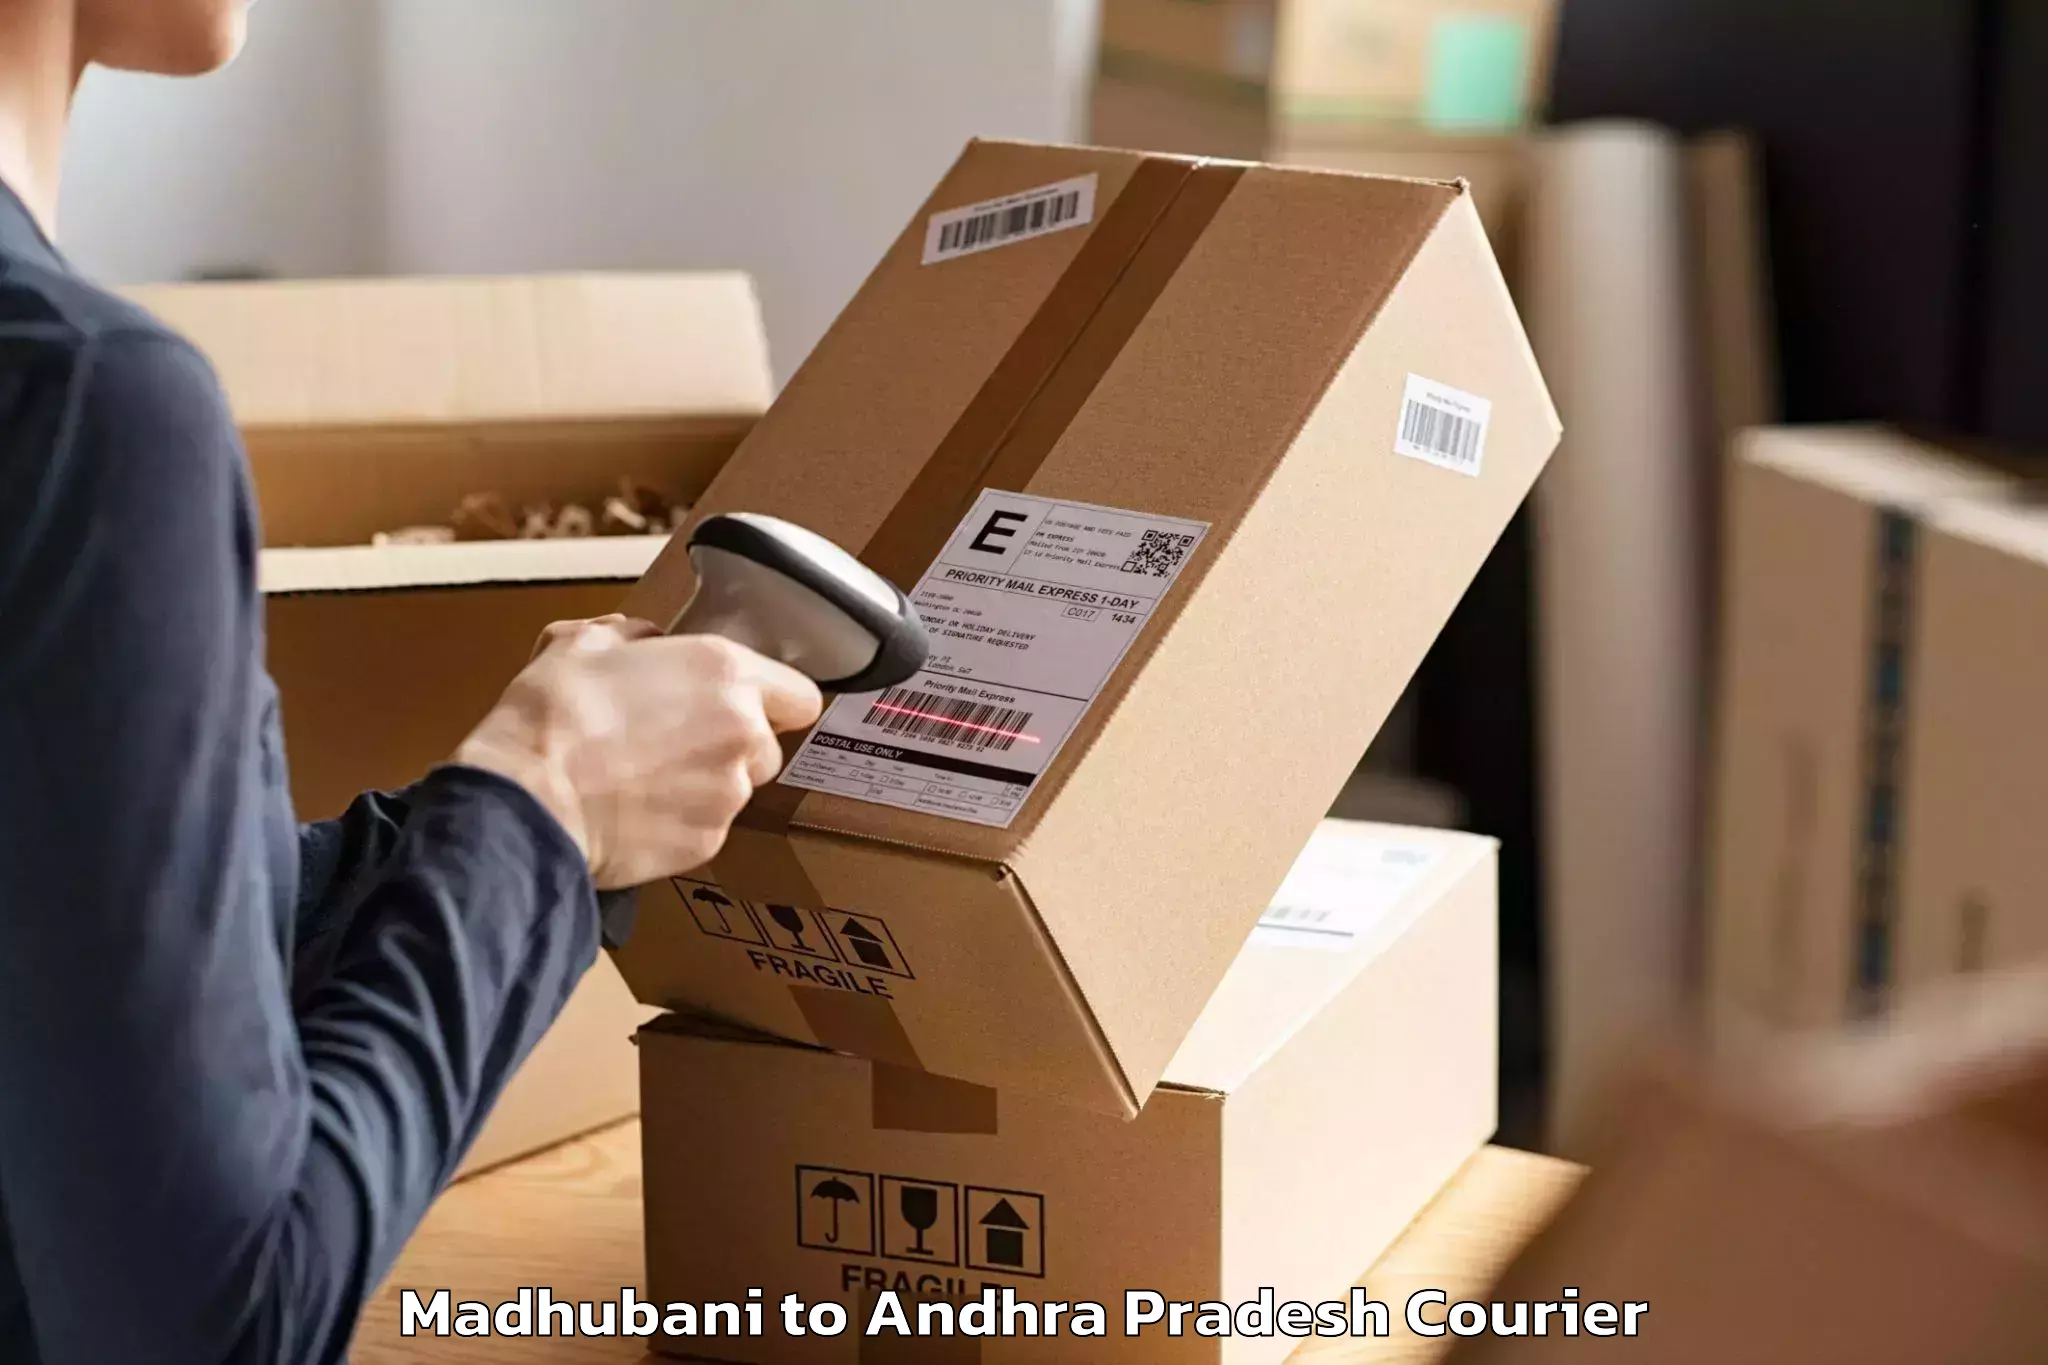 Furniture transport services in Madhubani to Challapalli